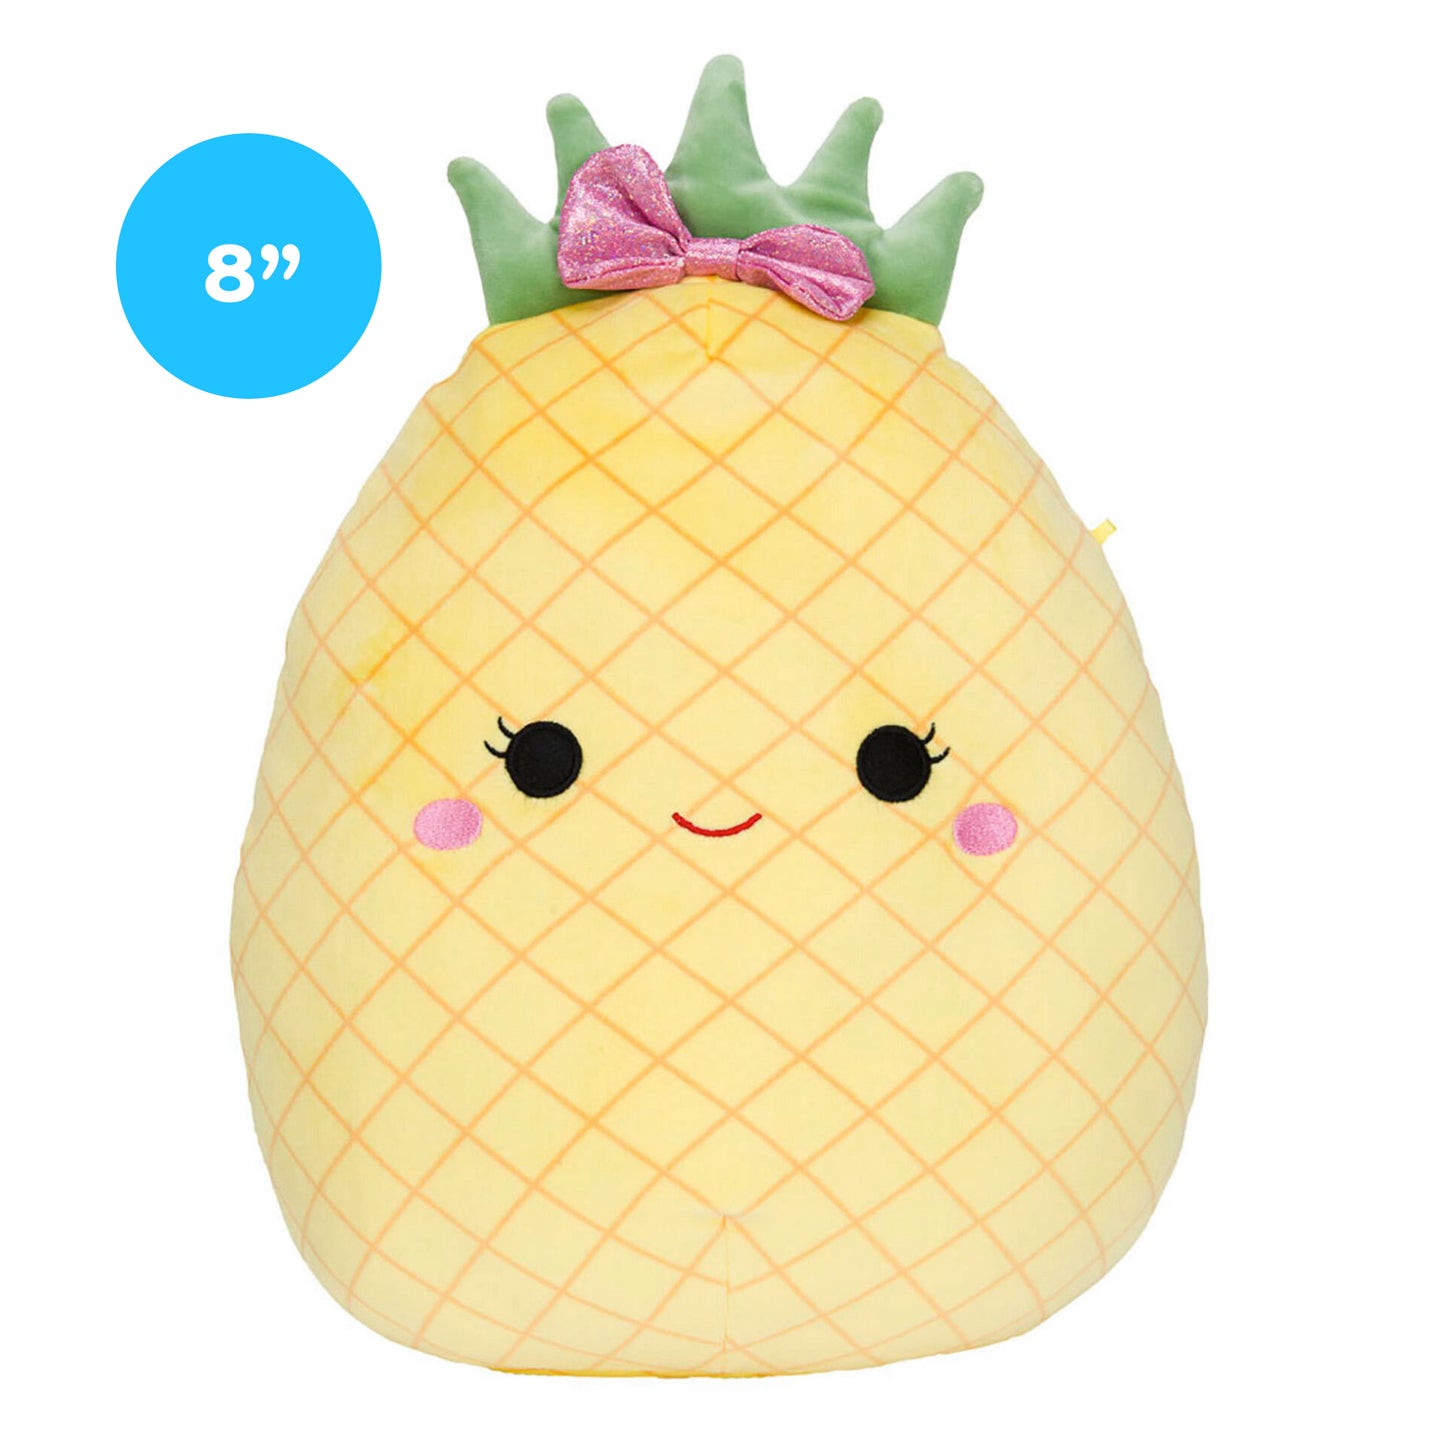 Lulu the Pineapple 8" Inch Squishmallow